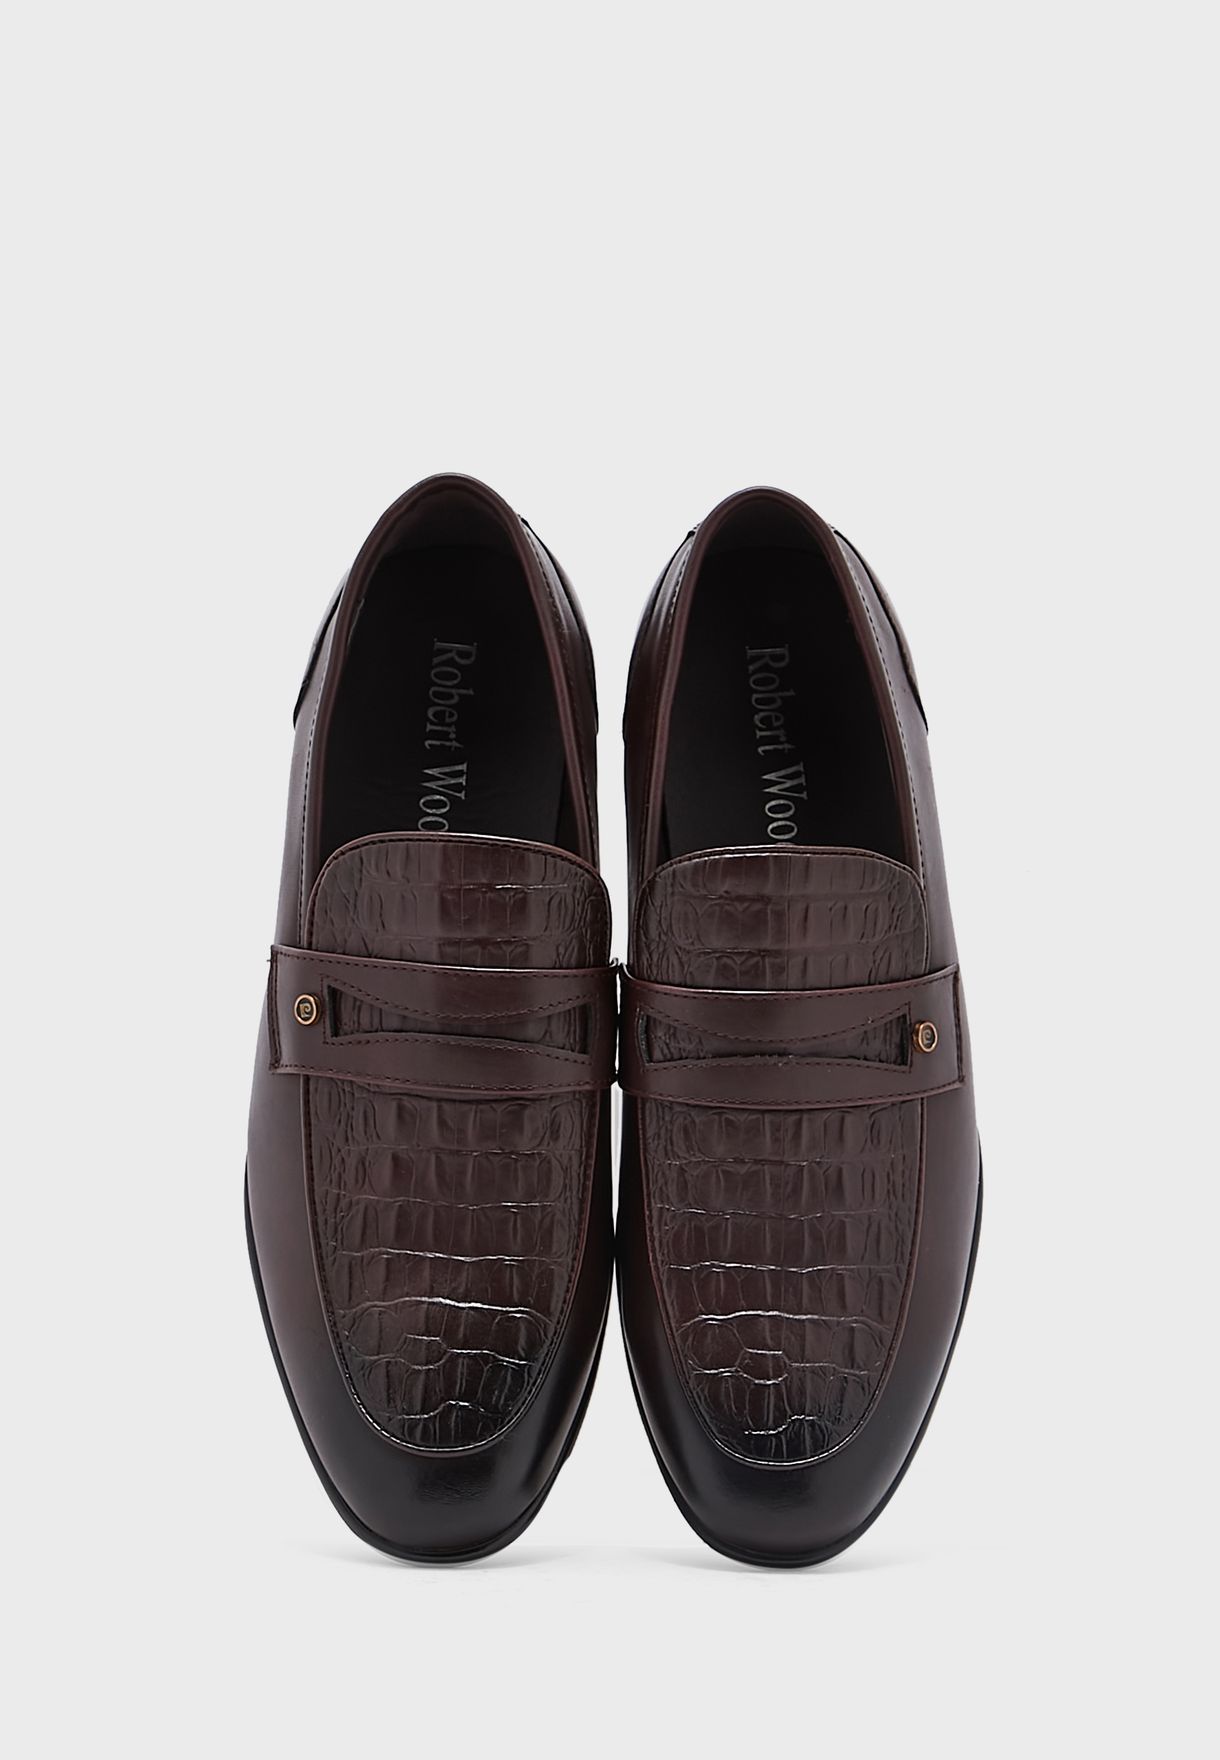 Faux Leather Croc Emboss Formal Slip Ons